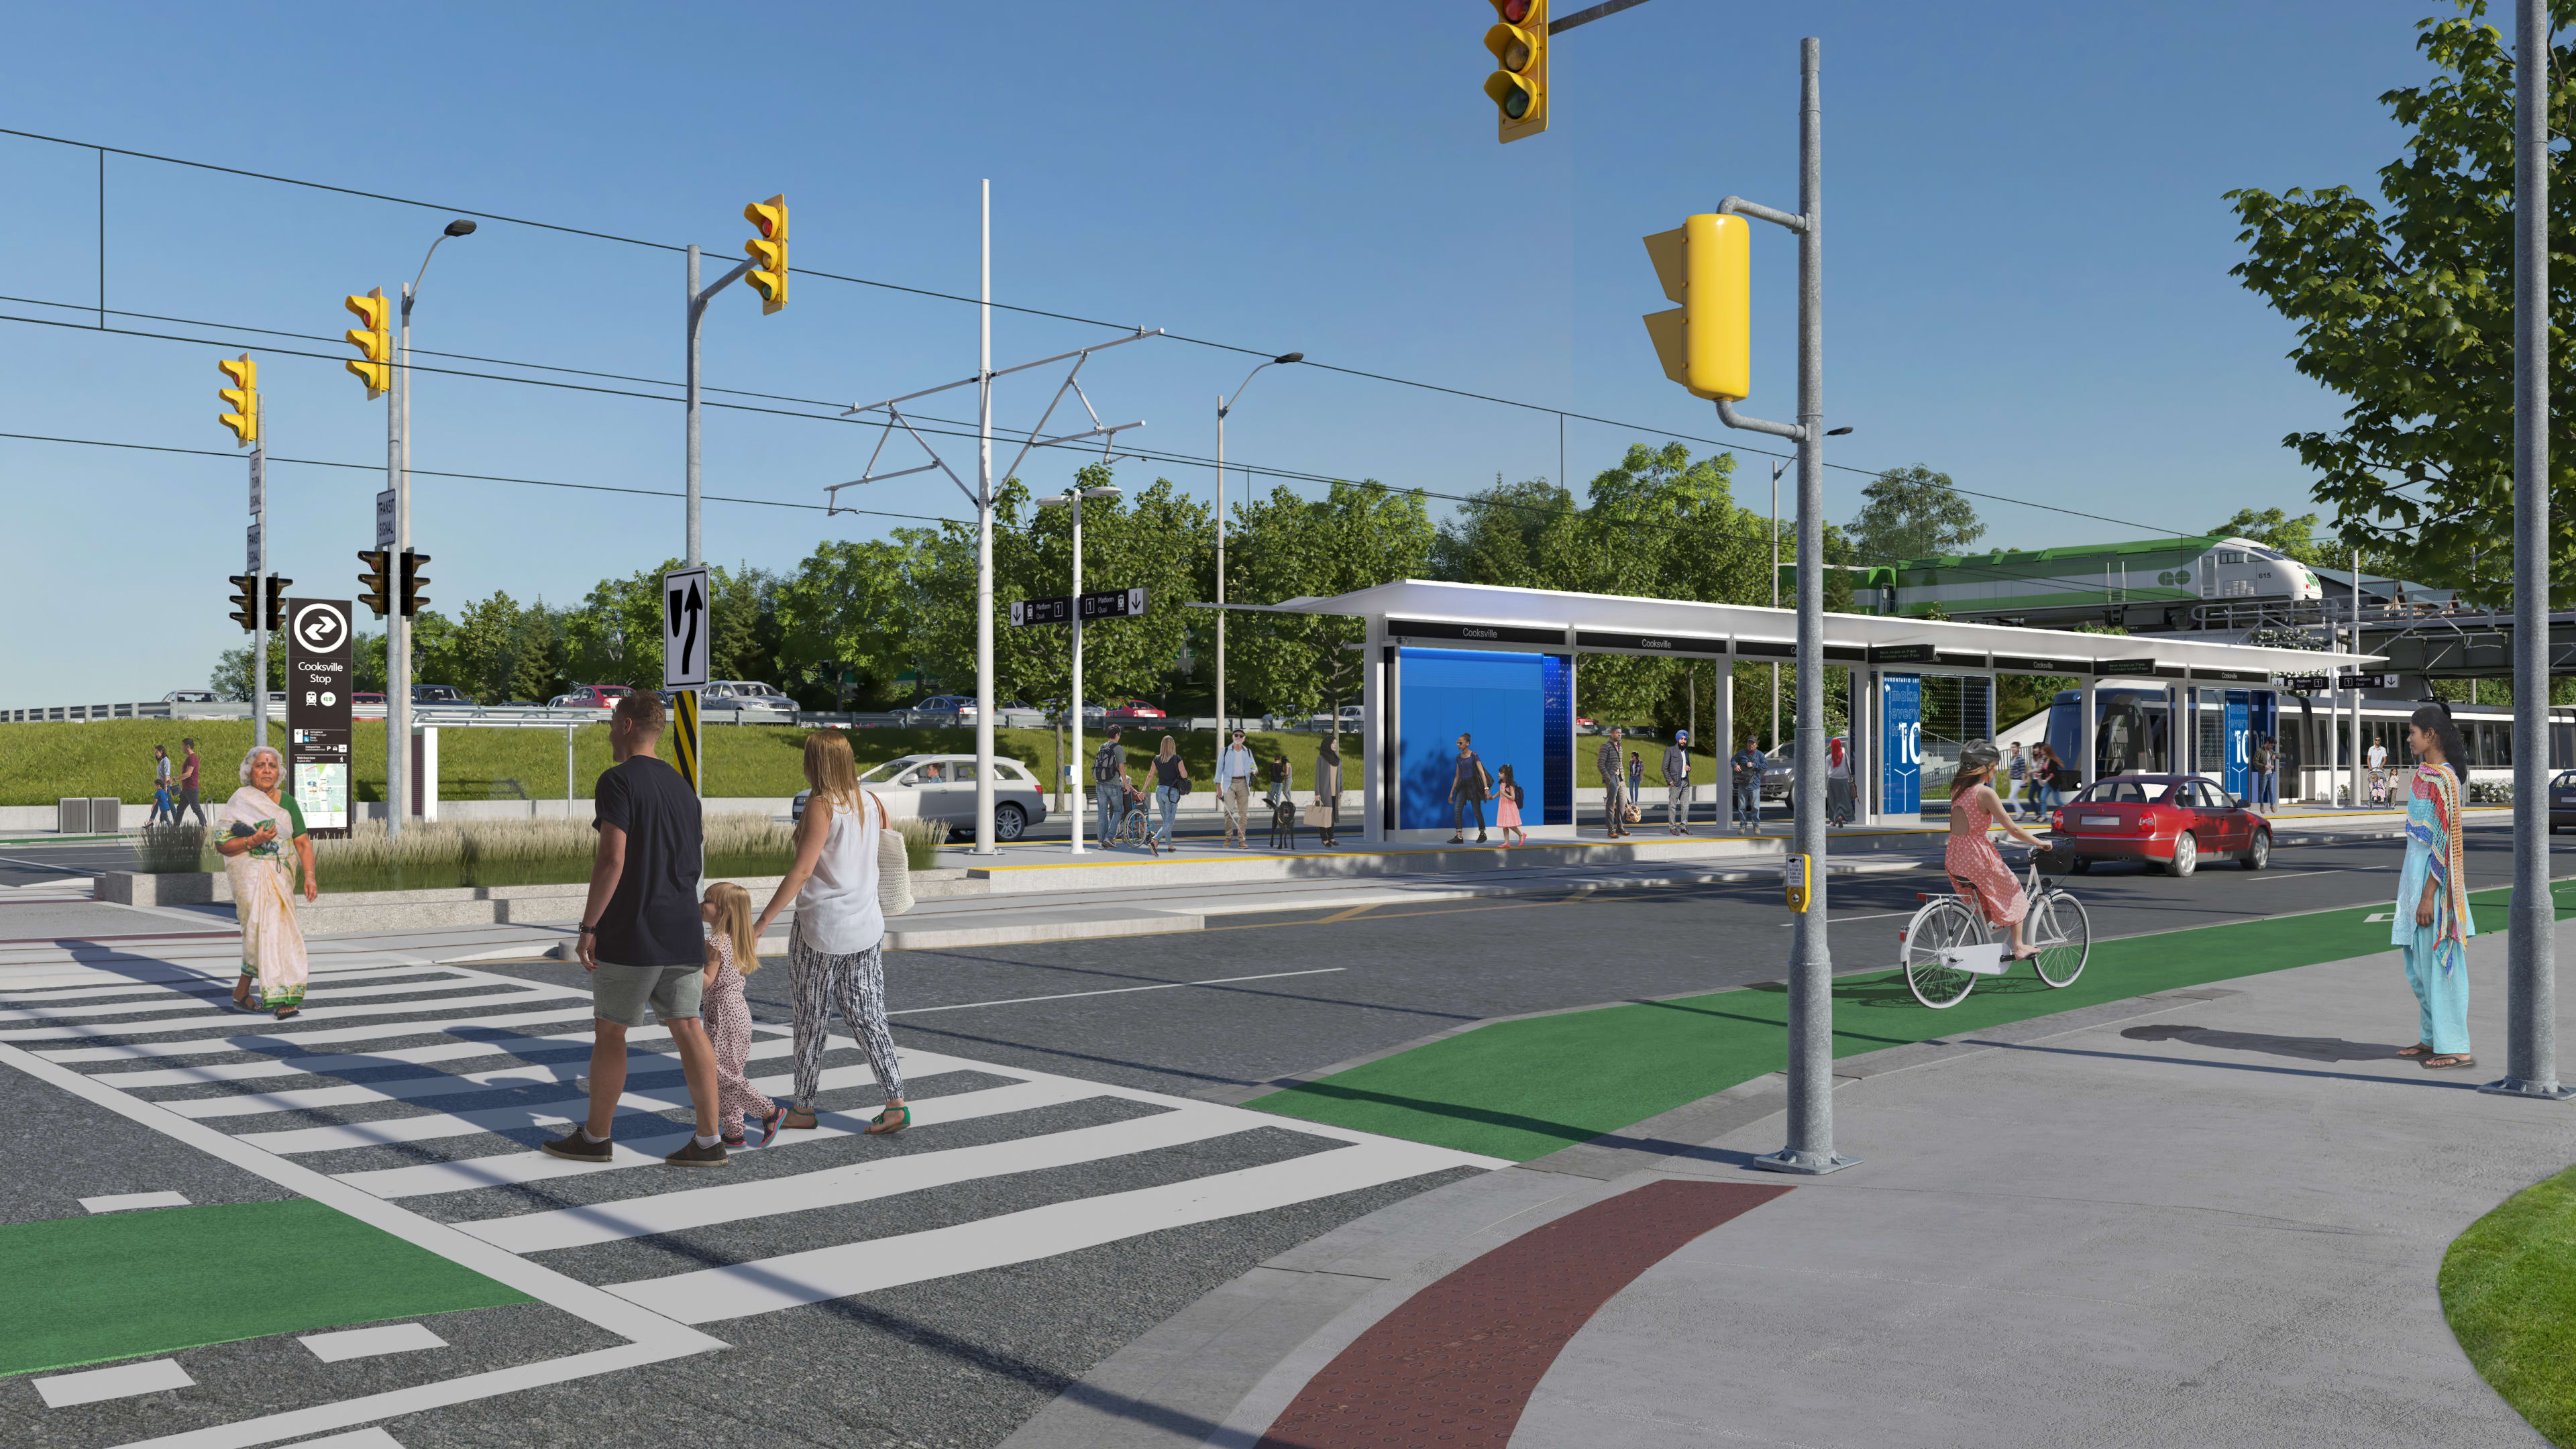 An artisit's rendering of the Cooksville stop